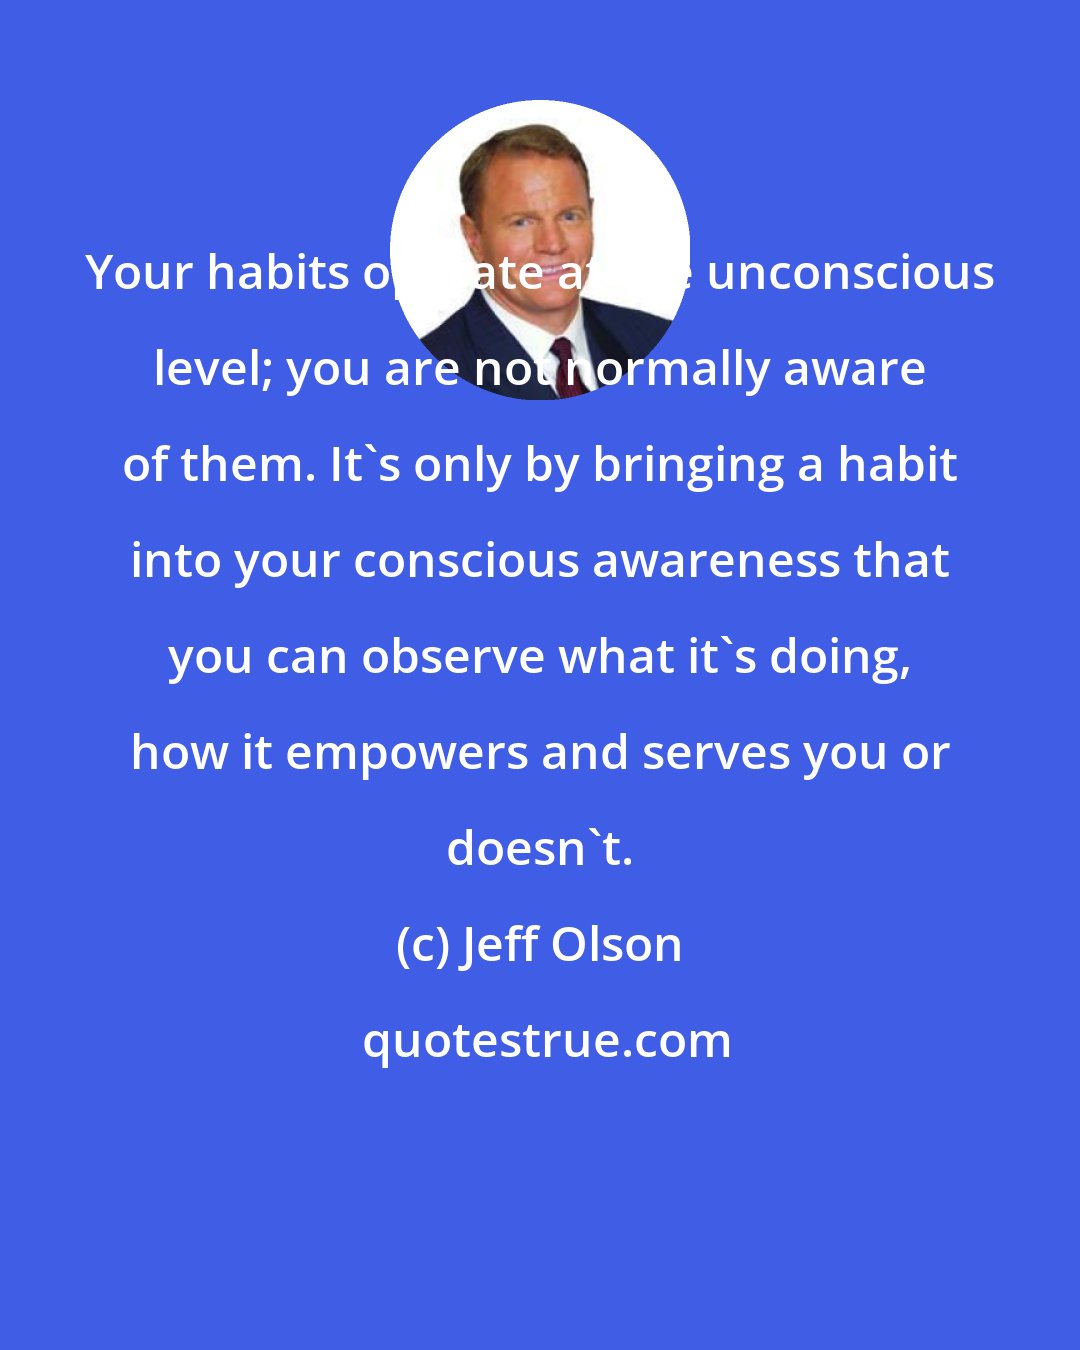 Jeff Olson: Your habits operate at the unconscious level; you are not normally aware of them. It's only by bringing a habit into your conscious awareness that you can observe what it's doing, how it empowers and serves you or doesn't.